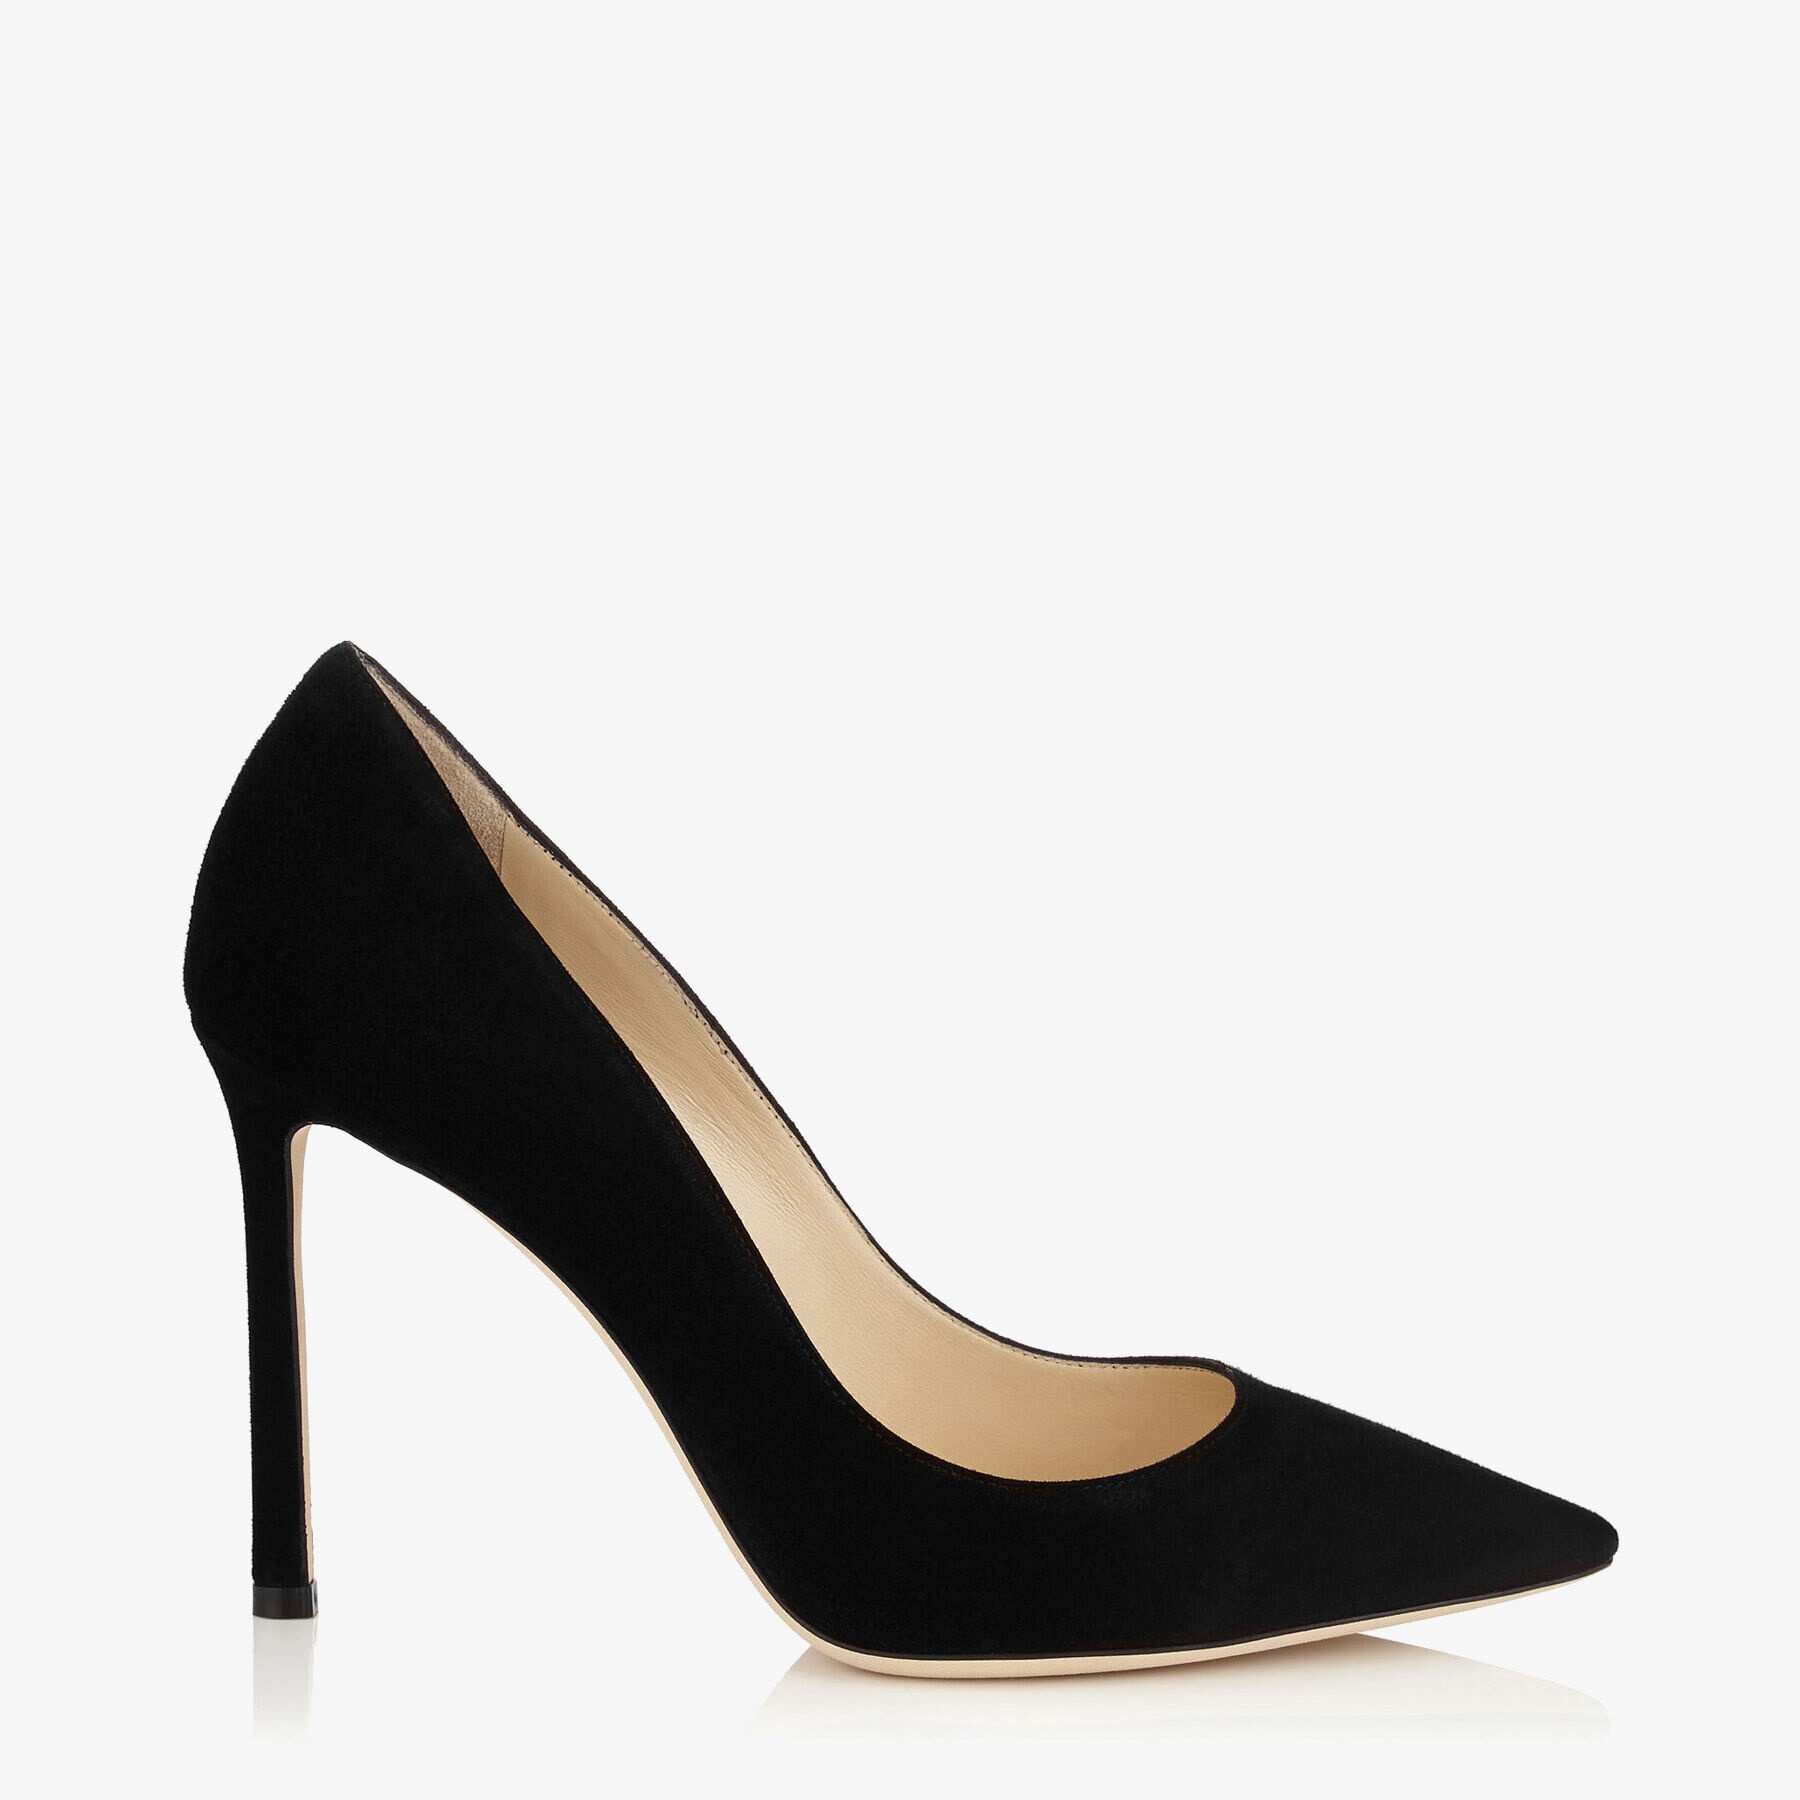 Romy 100
Black Suede Pointy Toe Pumps - 1